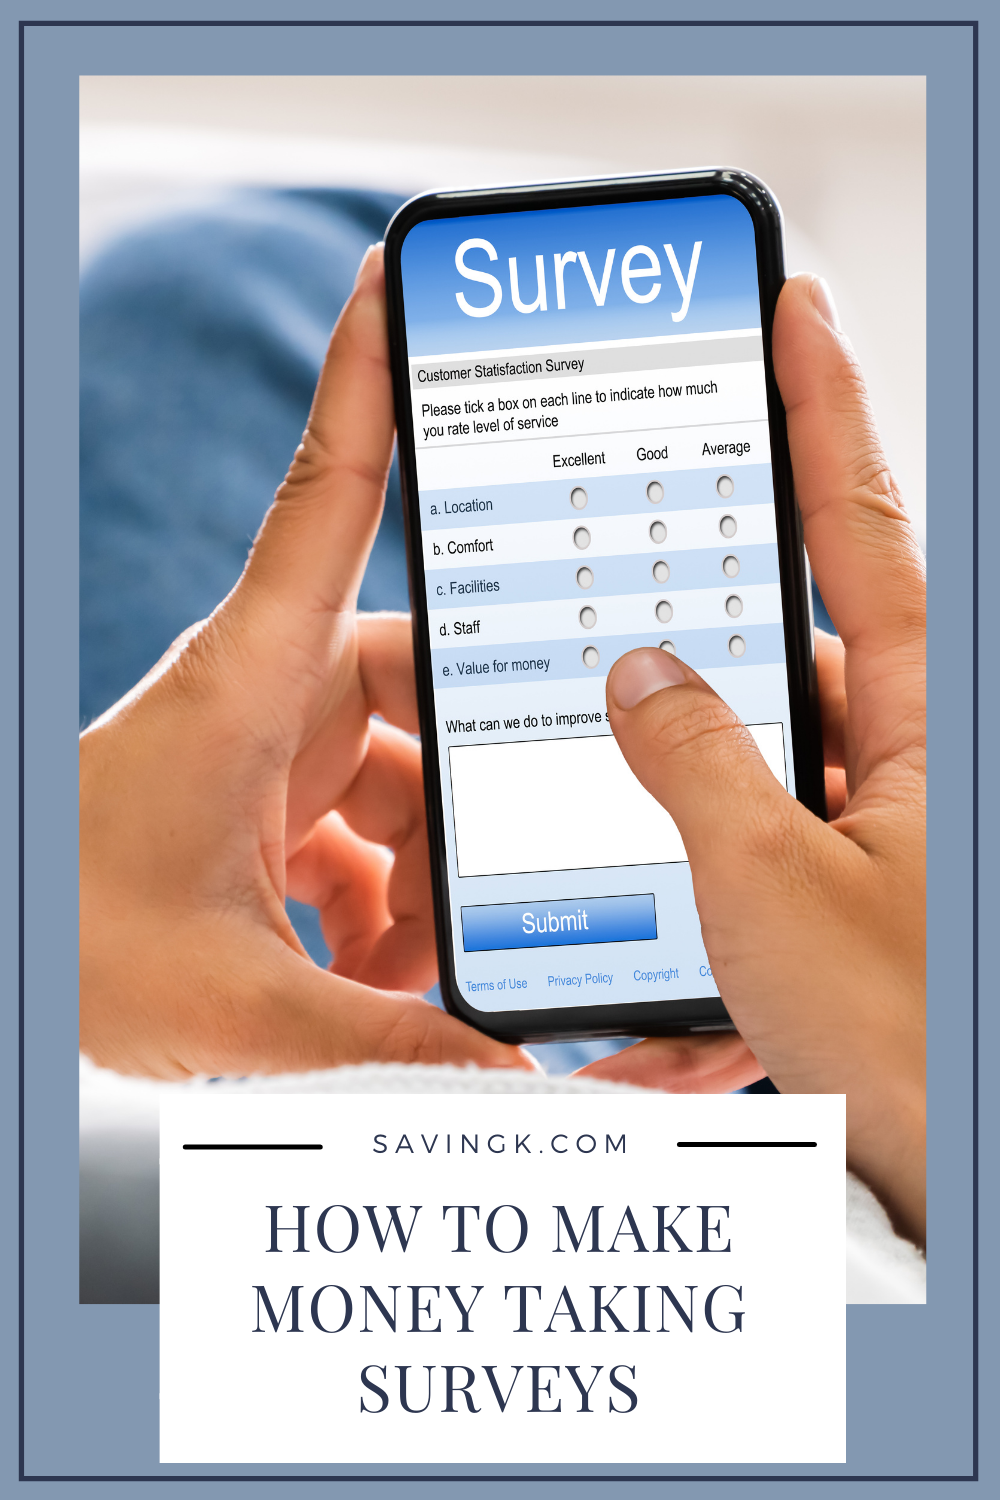 How To Make Money Taking Surveys On Your Phone